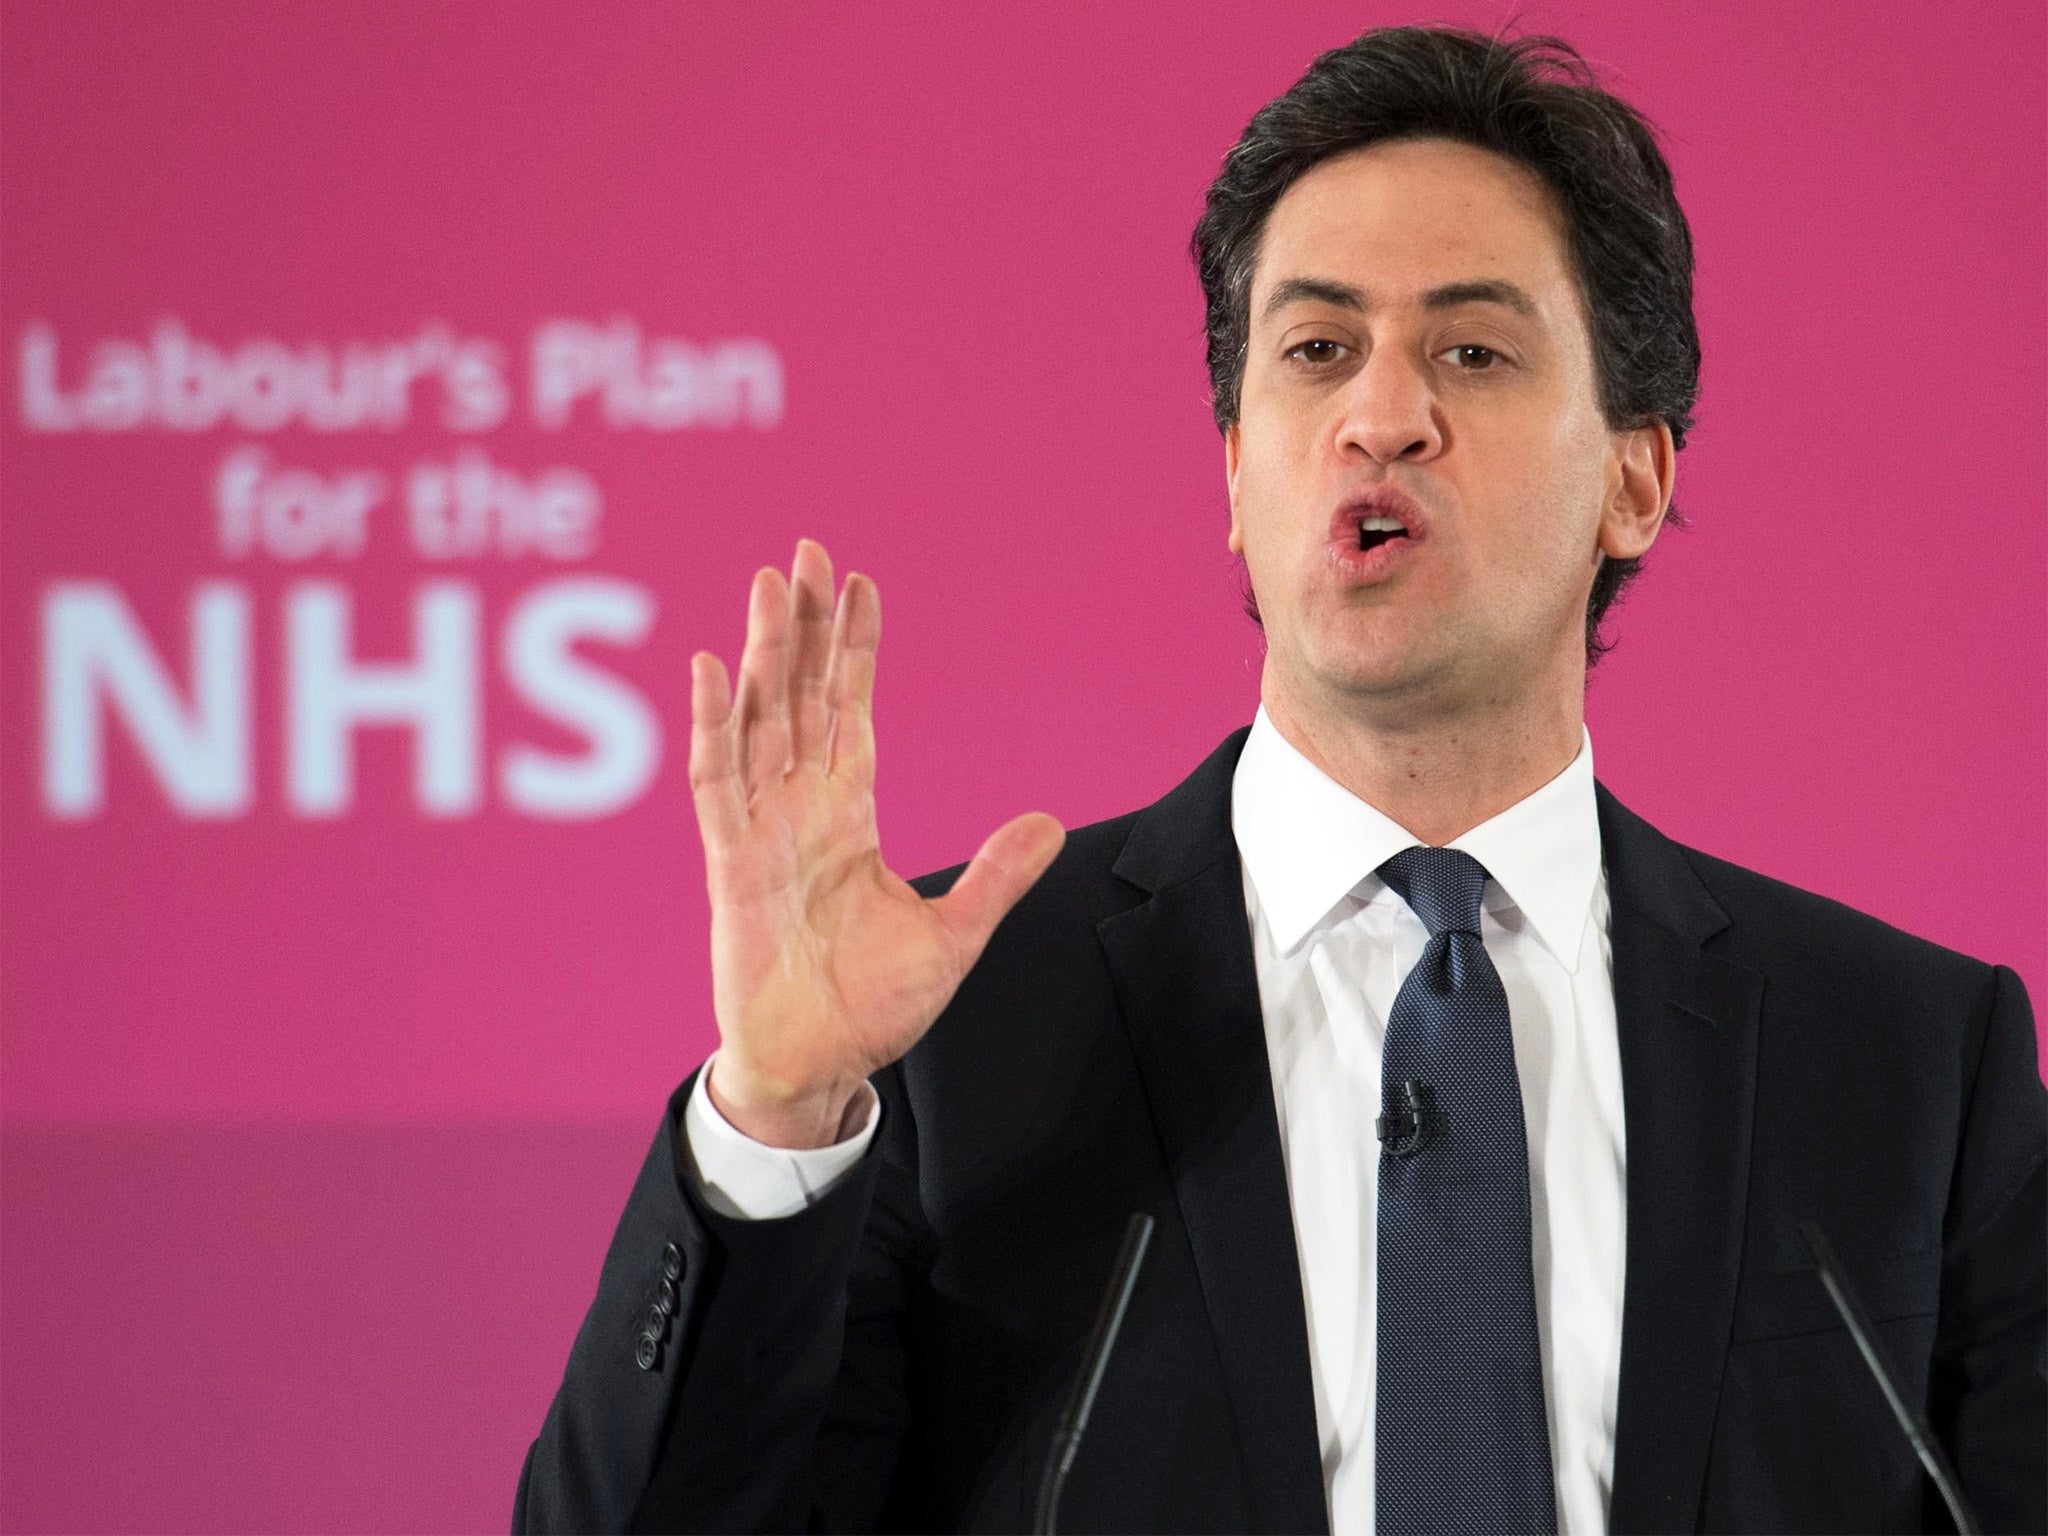 Labour leader Ed Miliband delivers a speech on his party's plans for the NHS, in Sale, on Tuesday